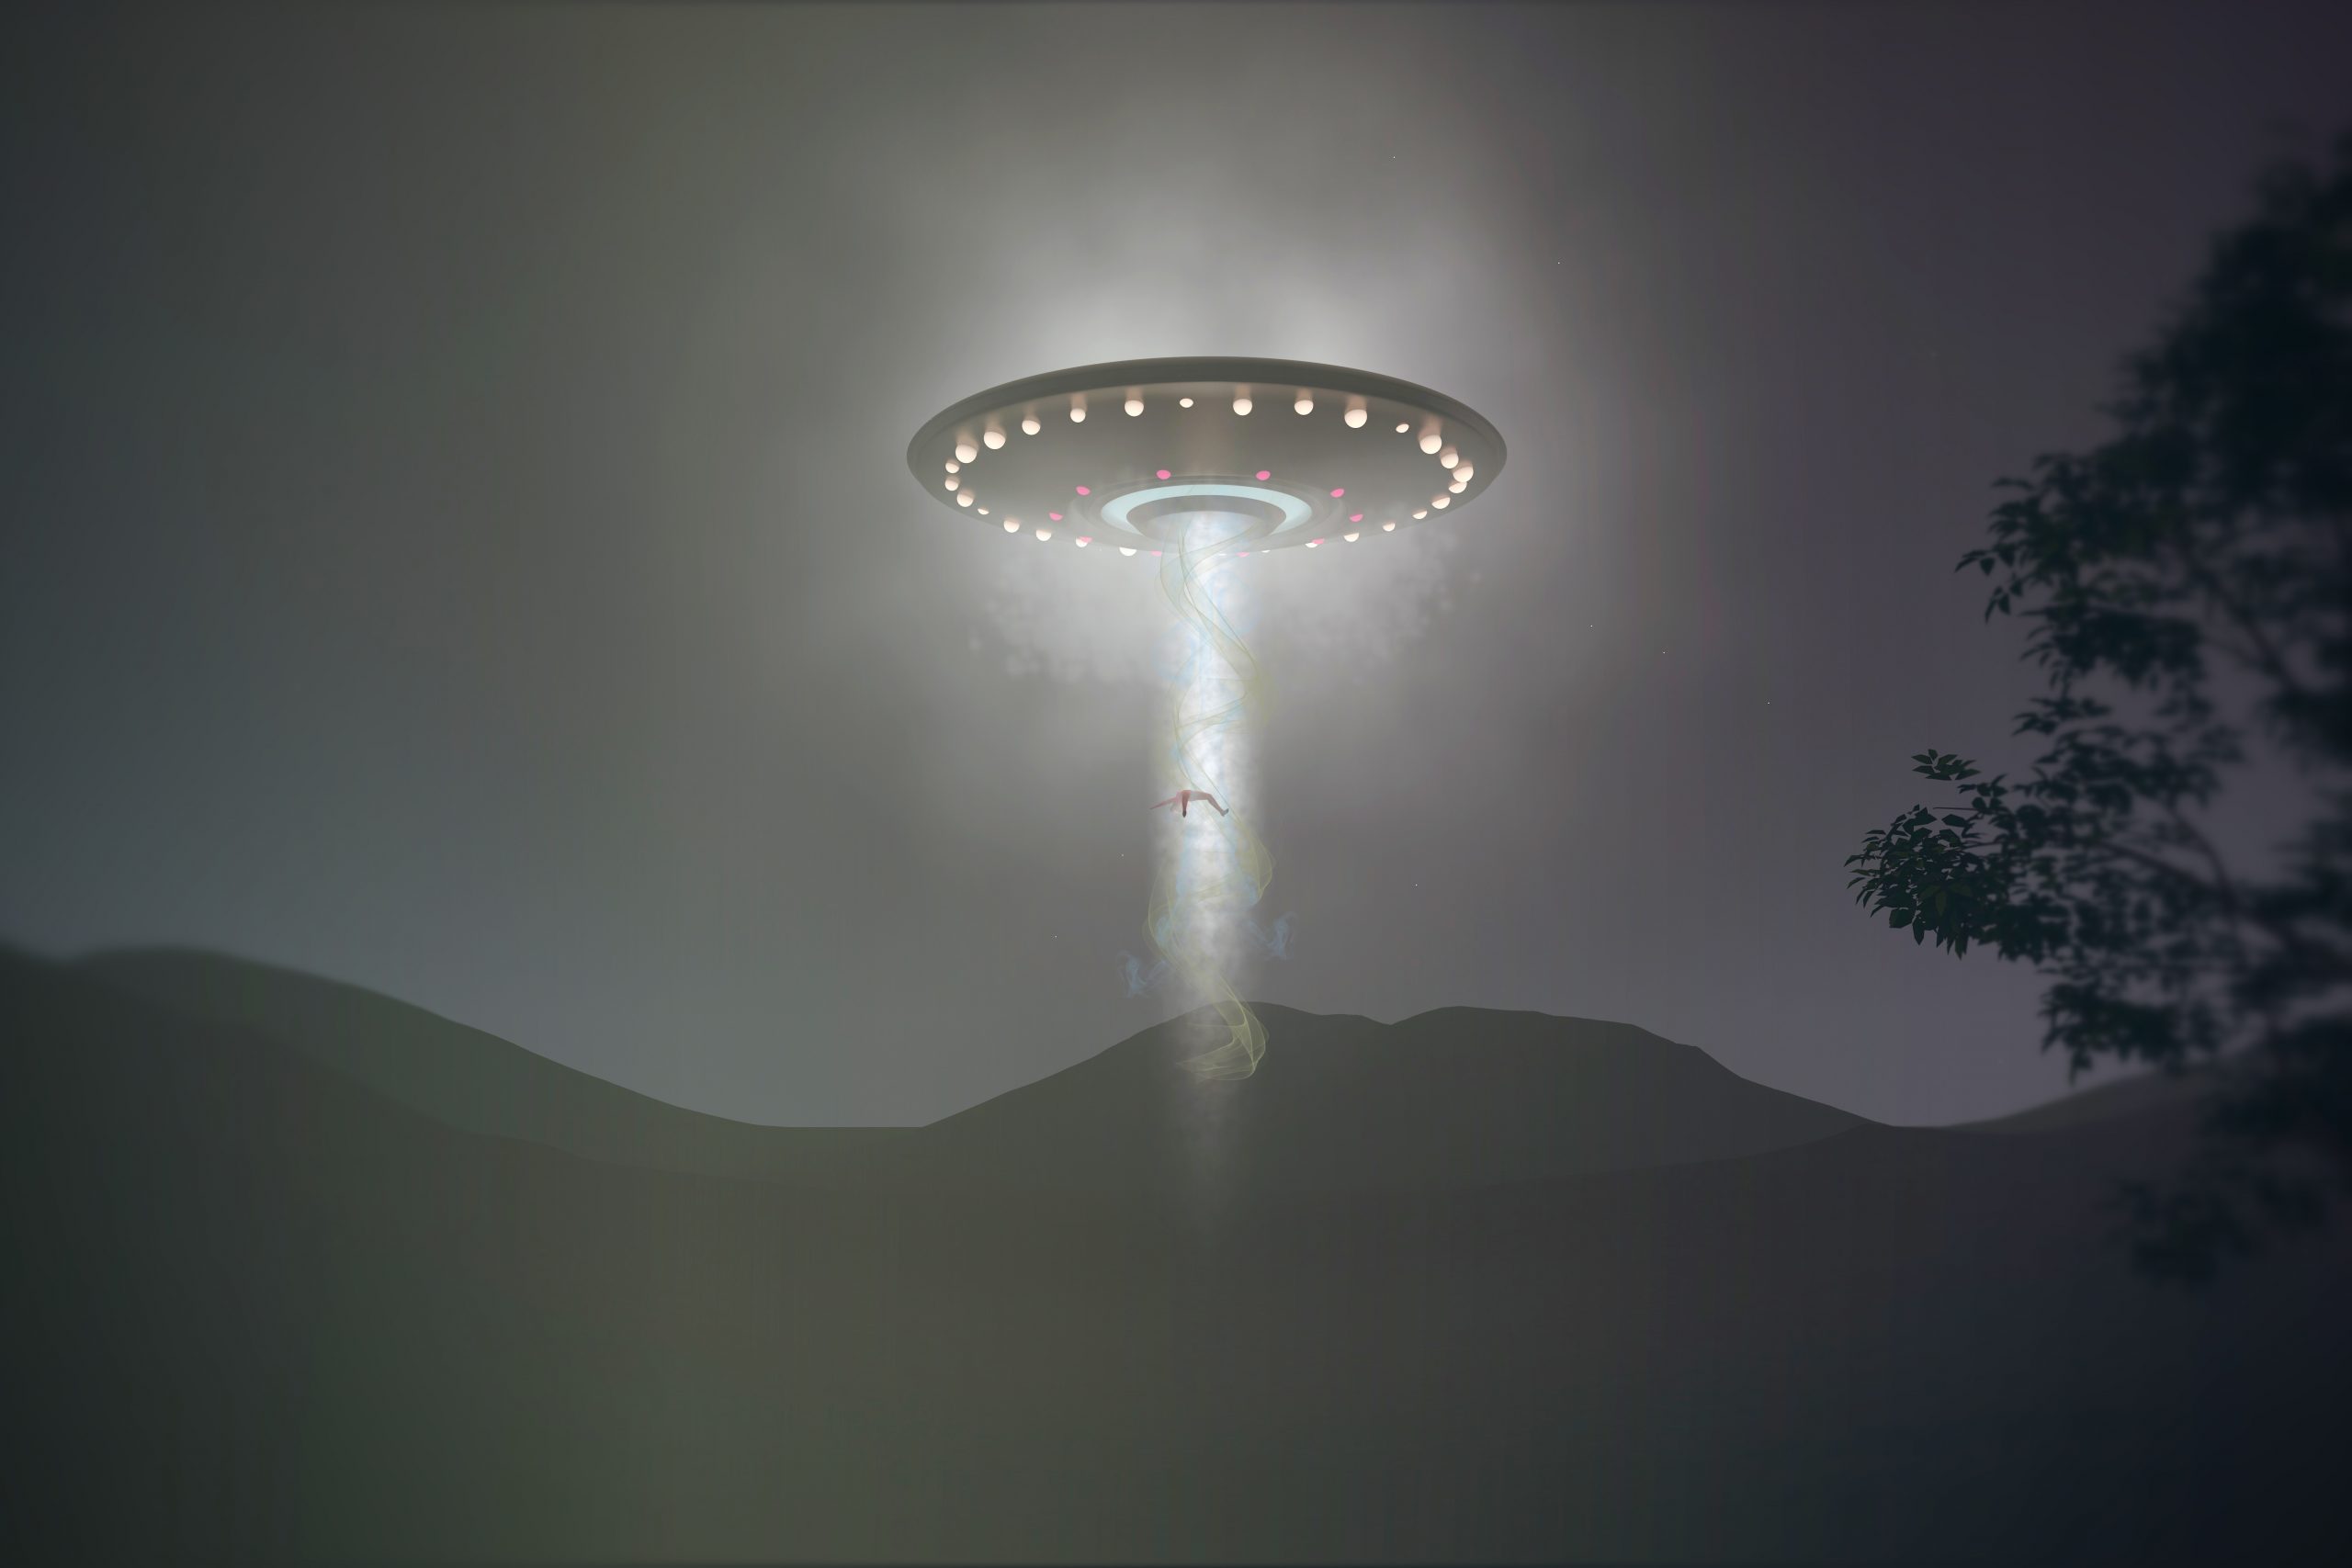 An artistic rendering showing an UFO abduction. Depositphotos.